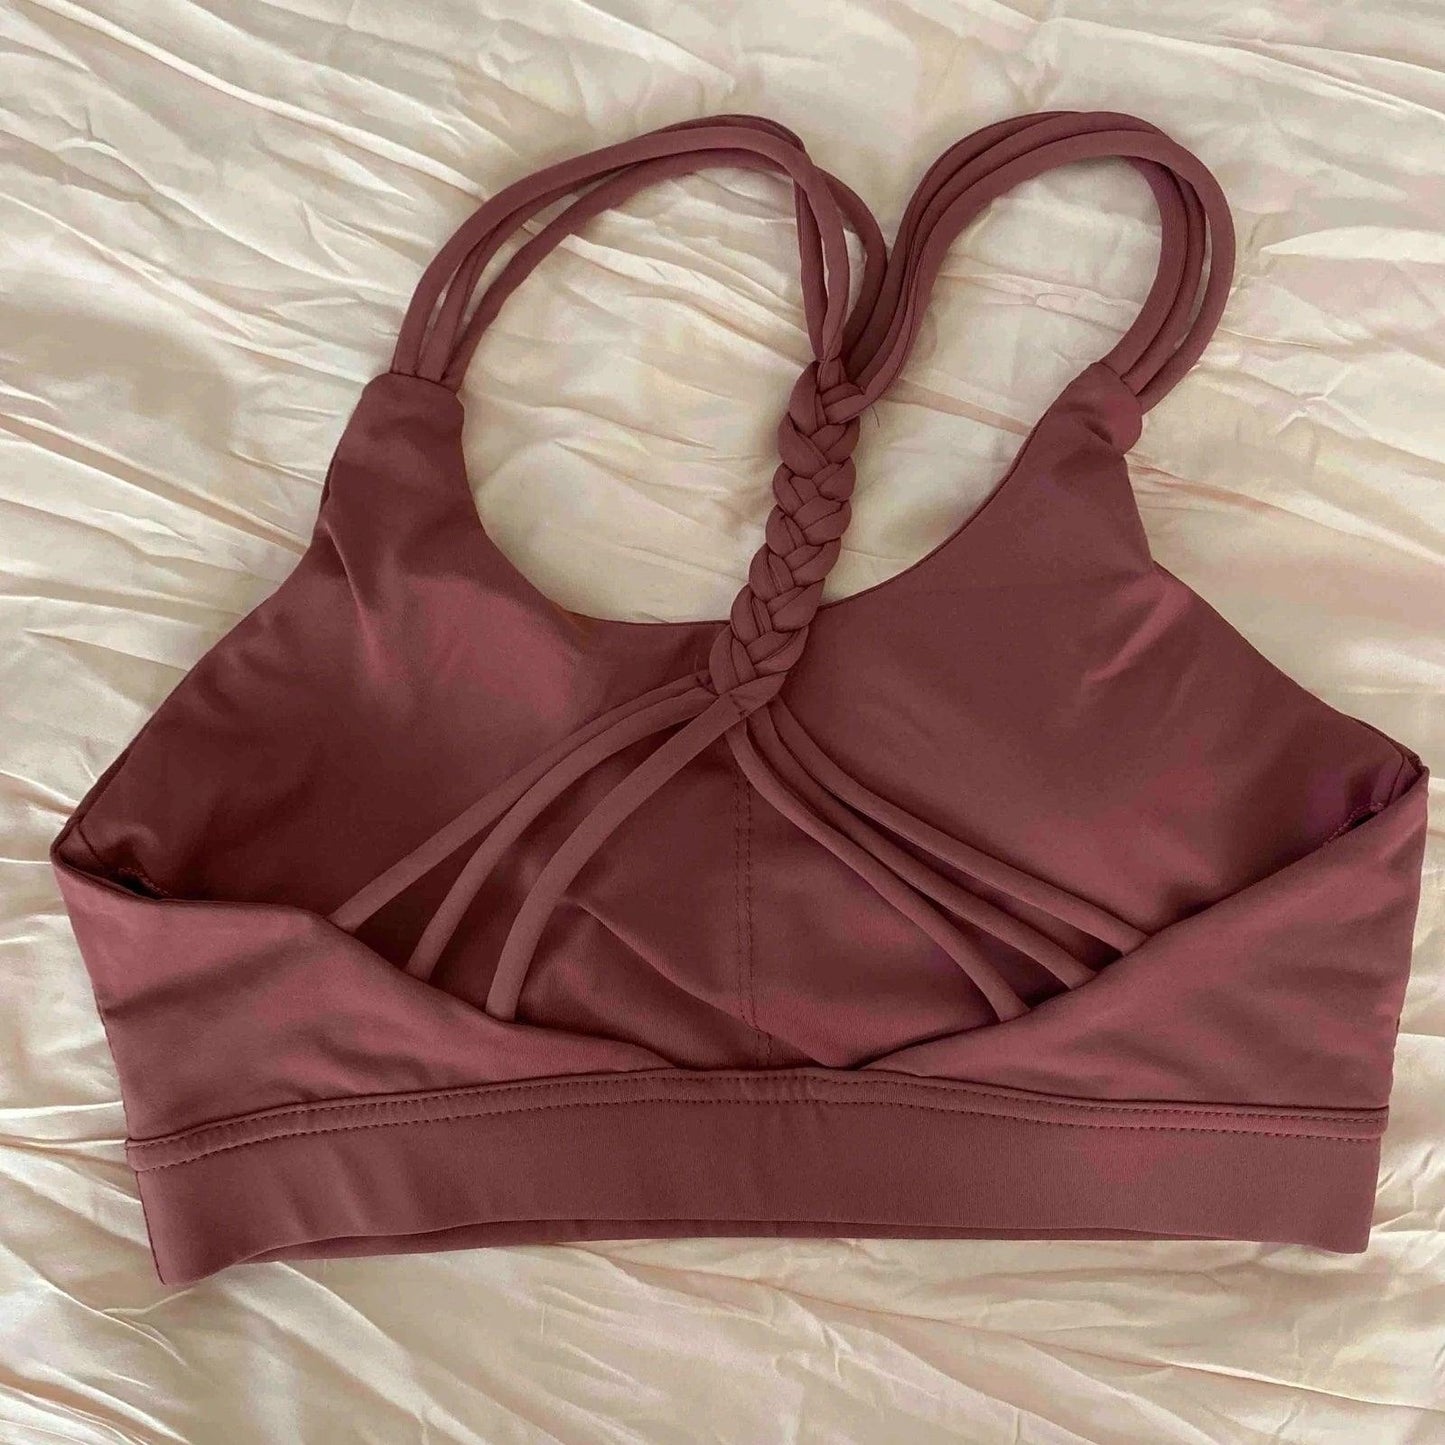 Criss Cross Knotted Up Sports Bra - 3 Colorways